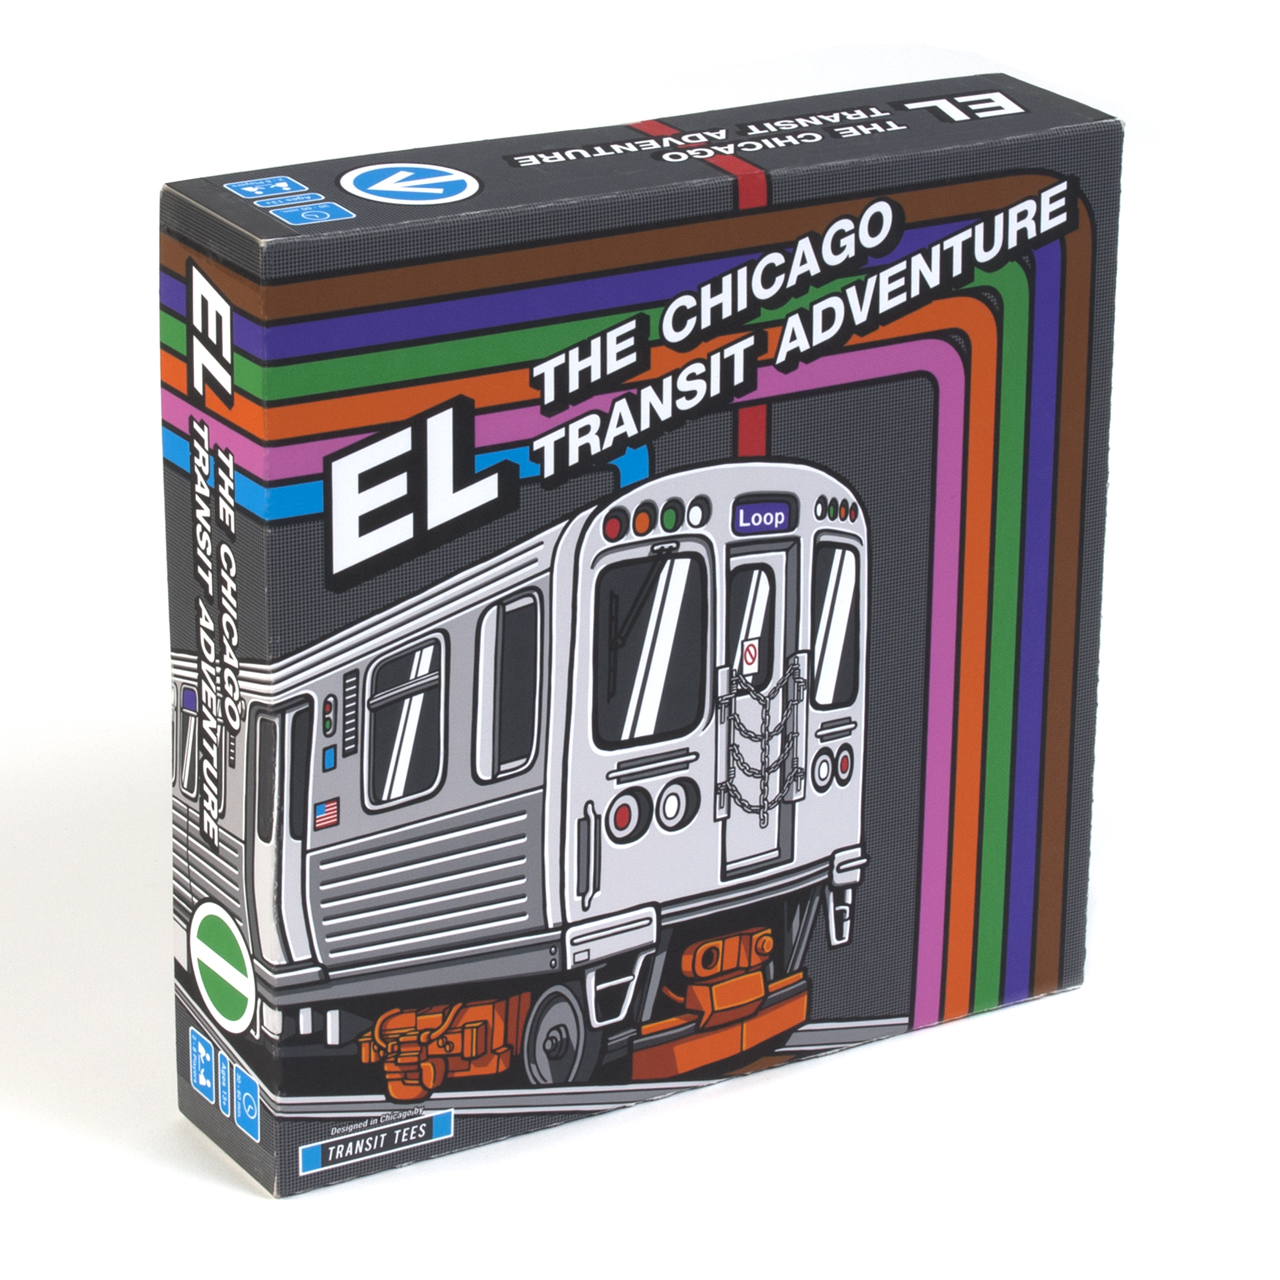 El chicago transit adventure board game holiday gift guide